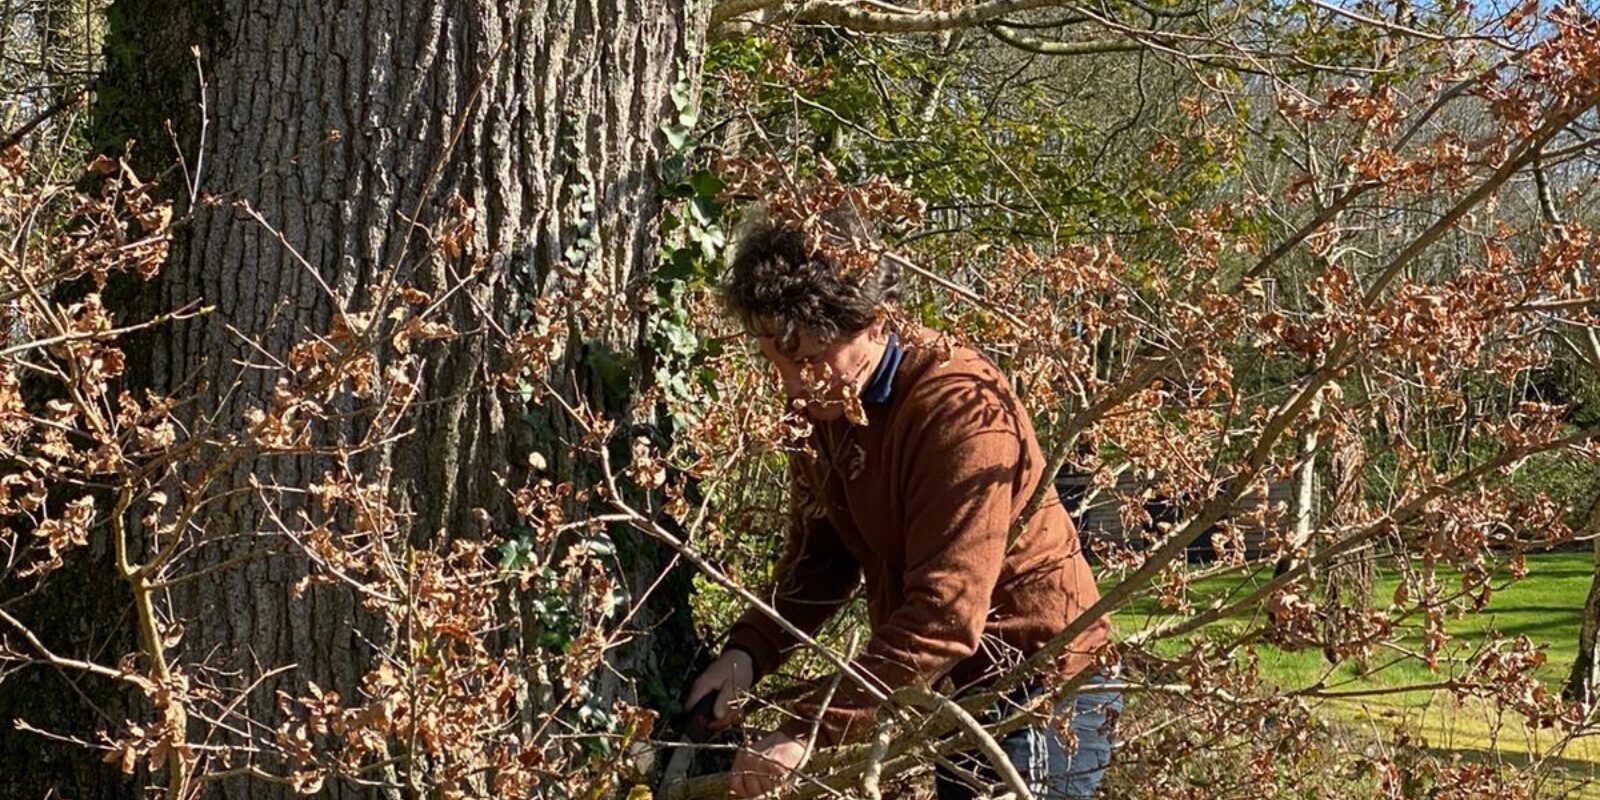 Ed clears away dead branches and ivy on a tree in Finnebrogue Woods